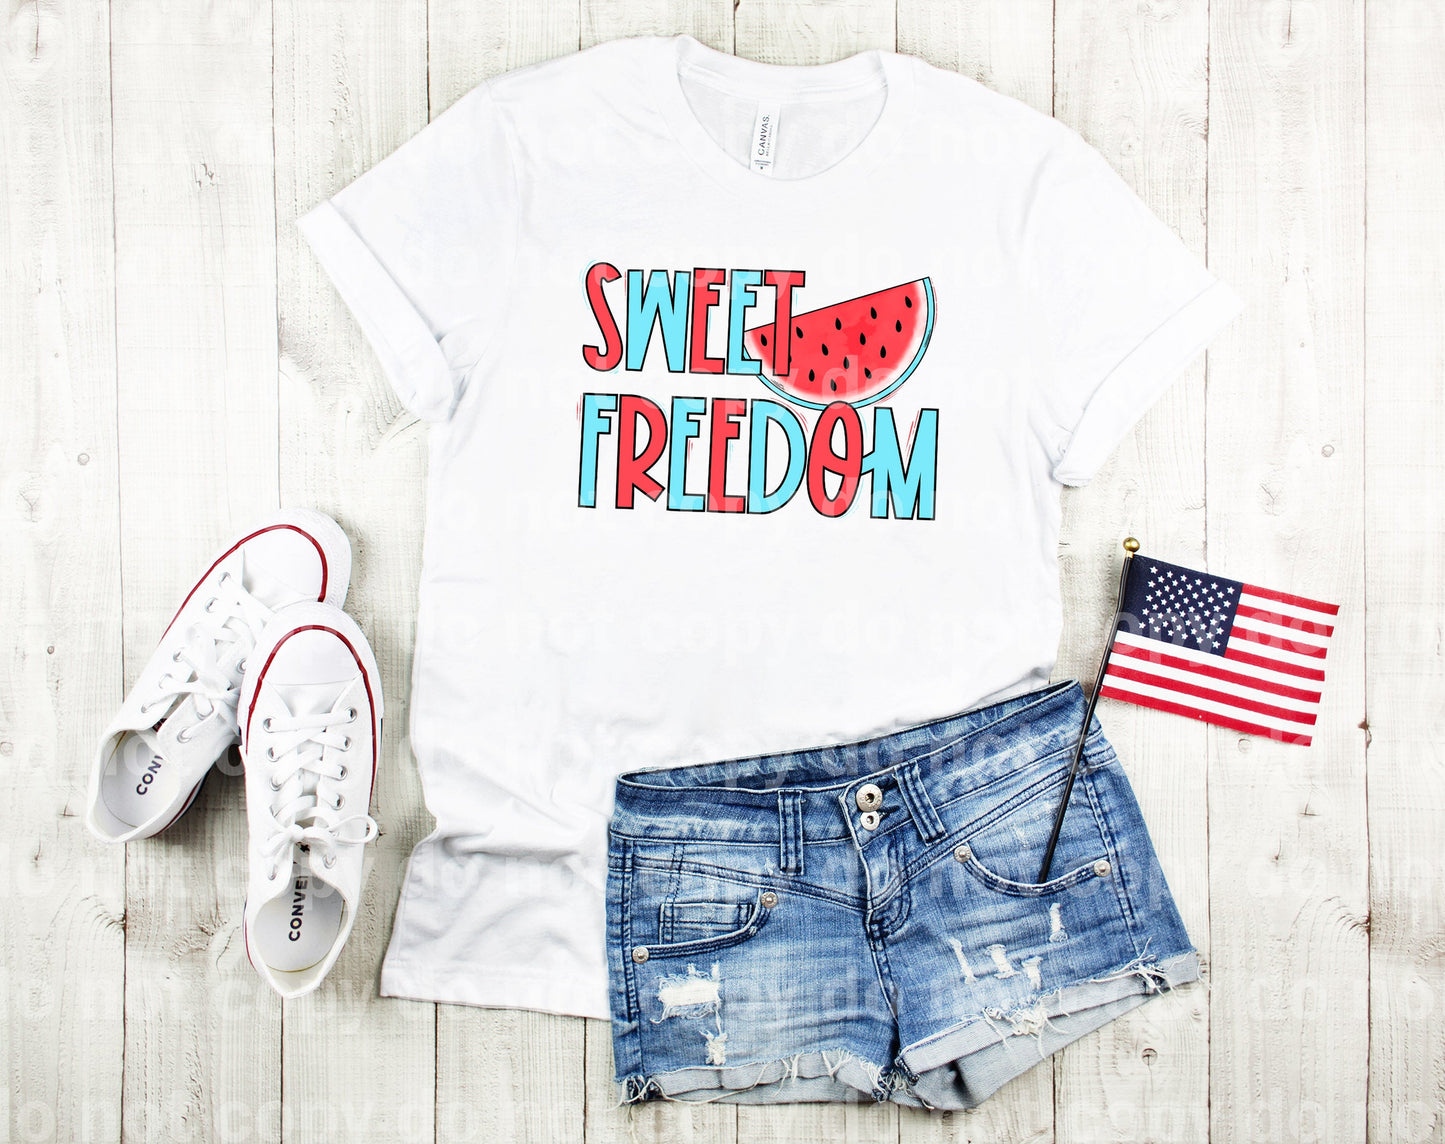 Sweet Freedom Watermelon with Watermelon Pocket Option Dream Print or Sublimation Print